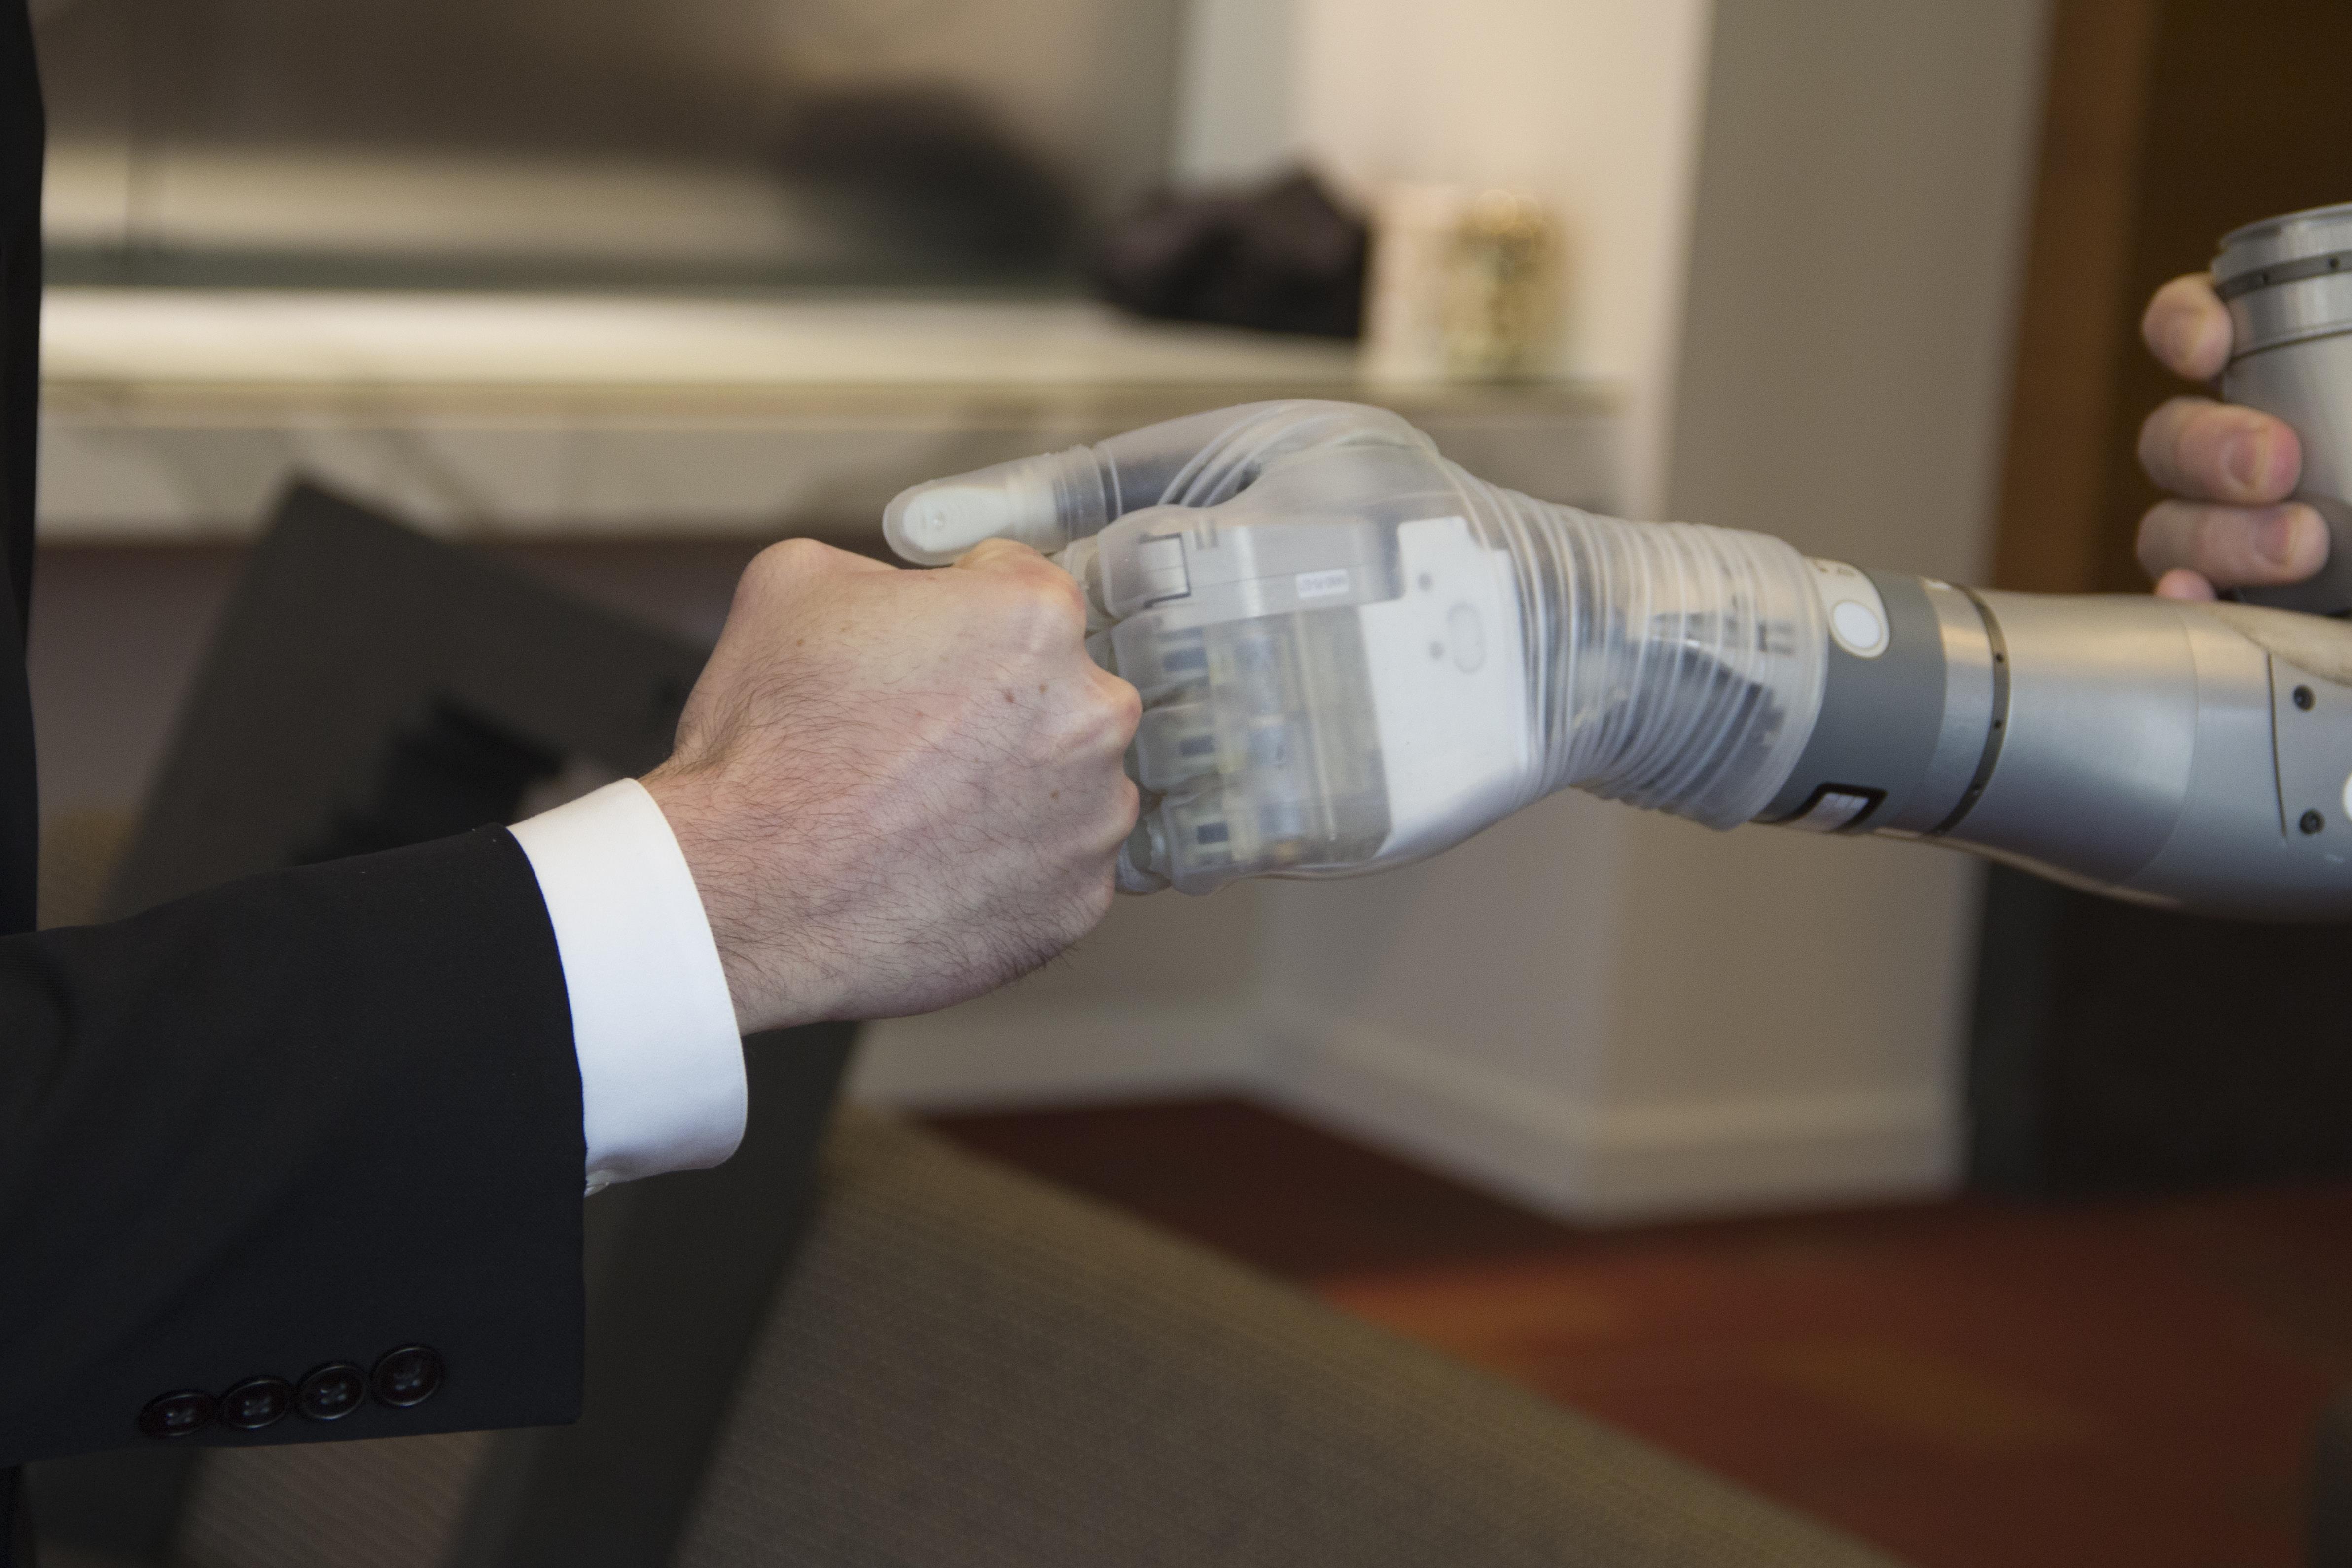 DARPA Provides Groundbreaking Bionic Arms to Walter Reed > U.S. Department  of Defense > Defense Department News